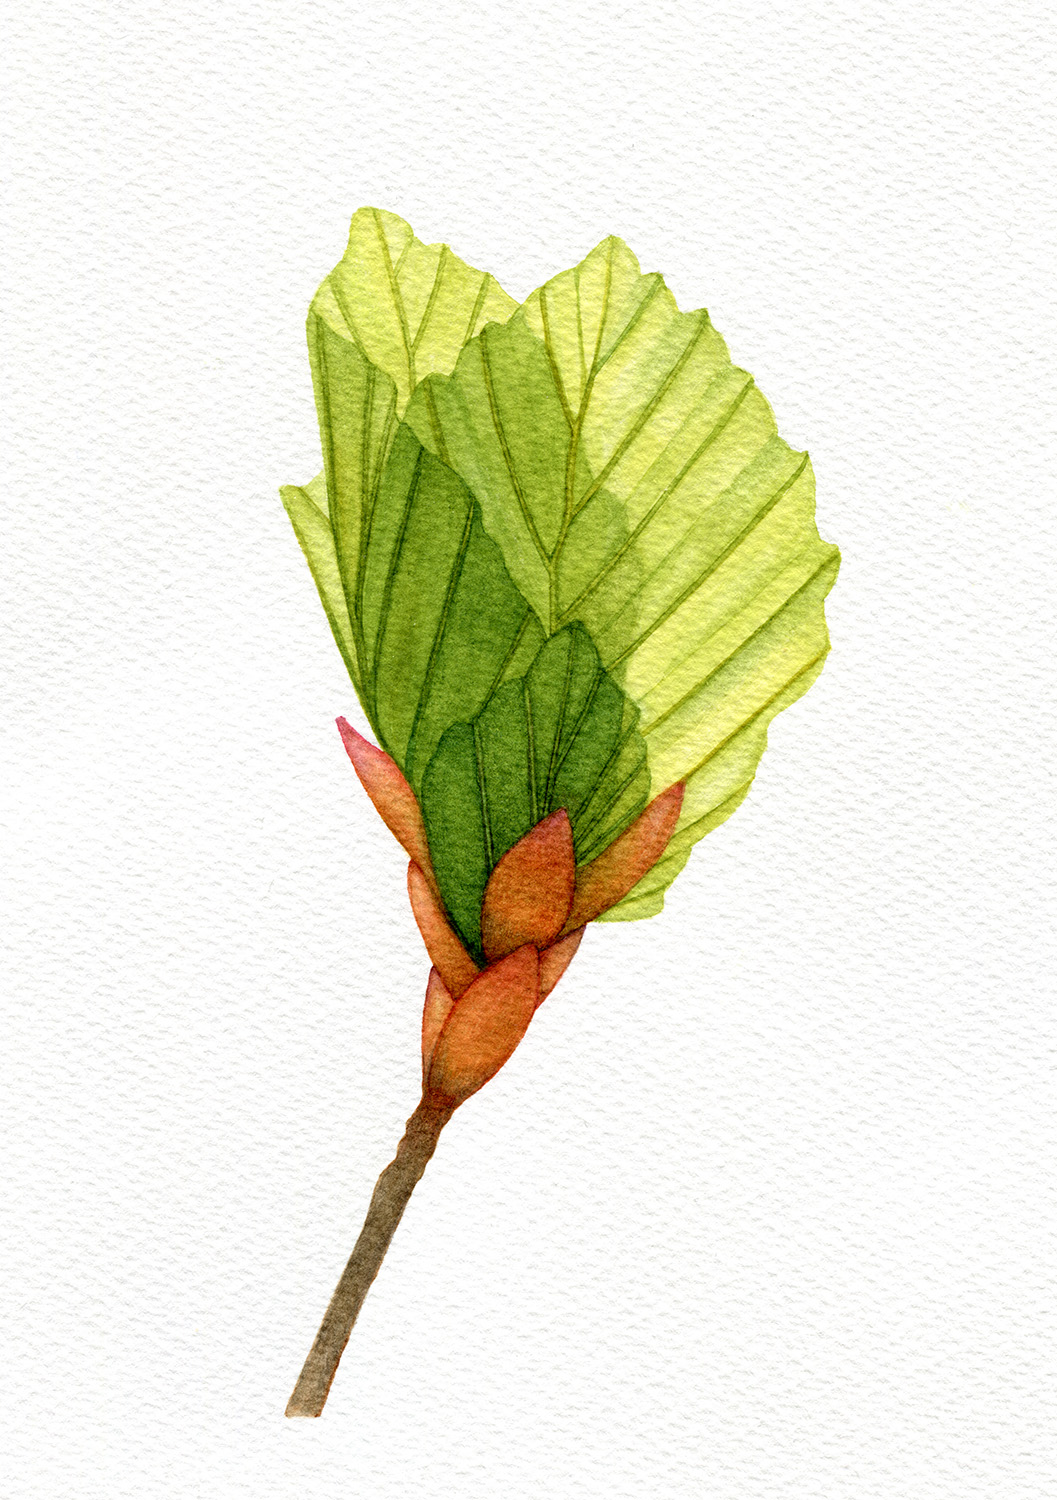 oona-culley-beech-tree-bud-opening-A5